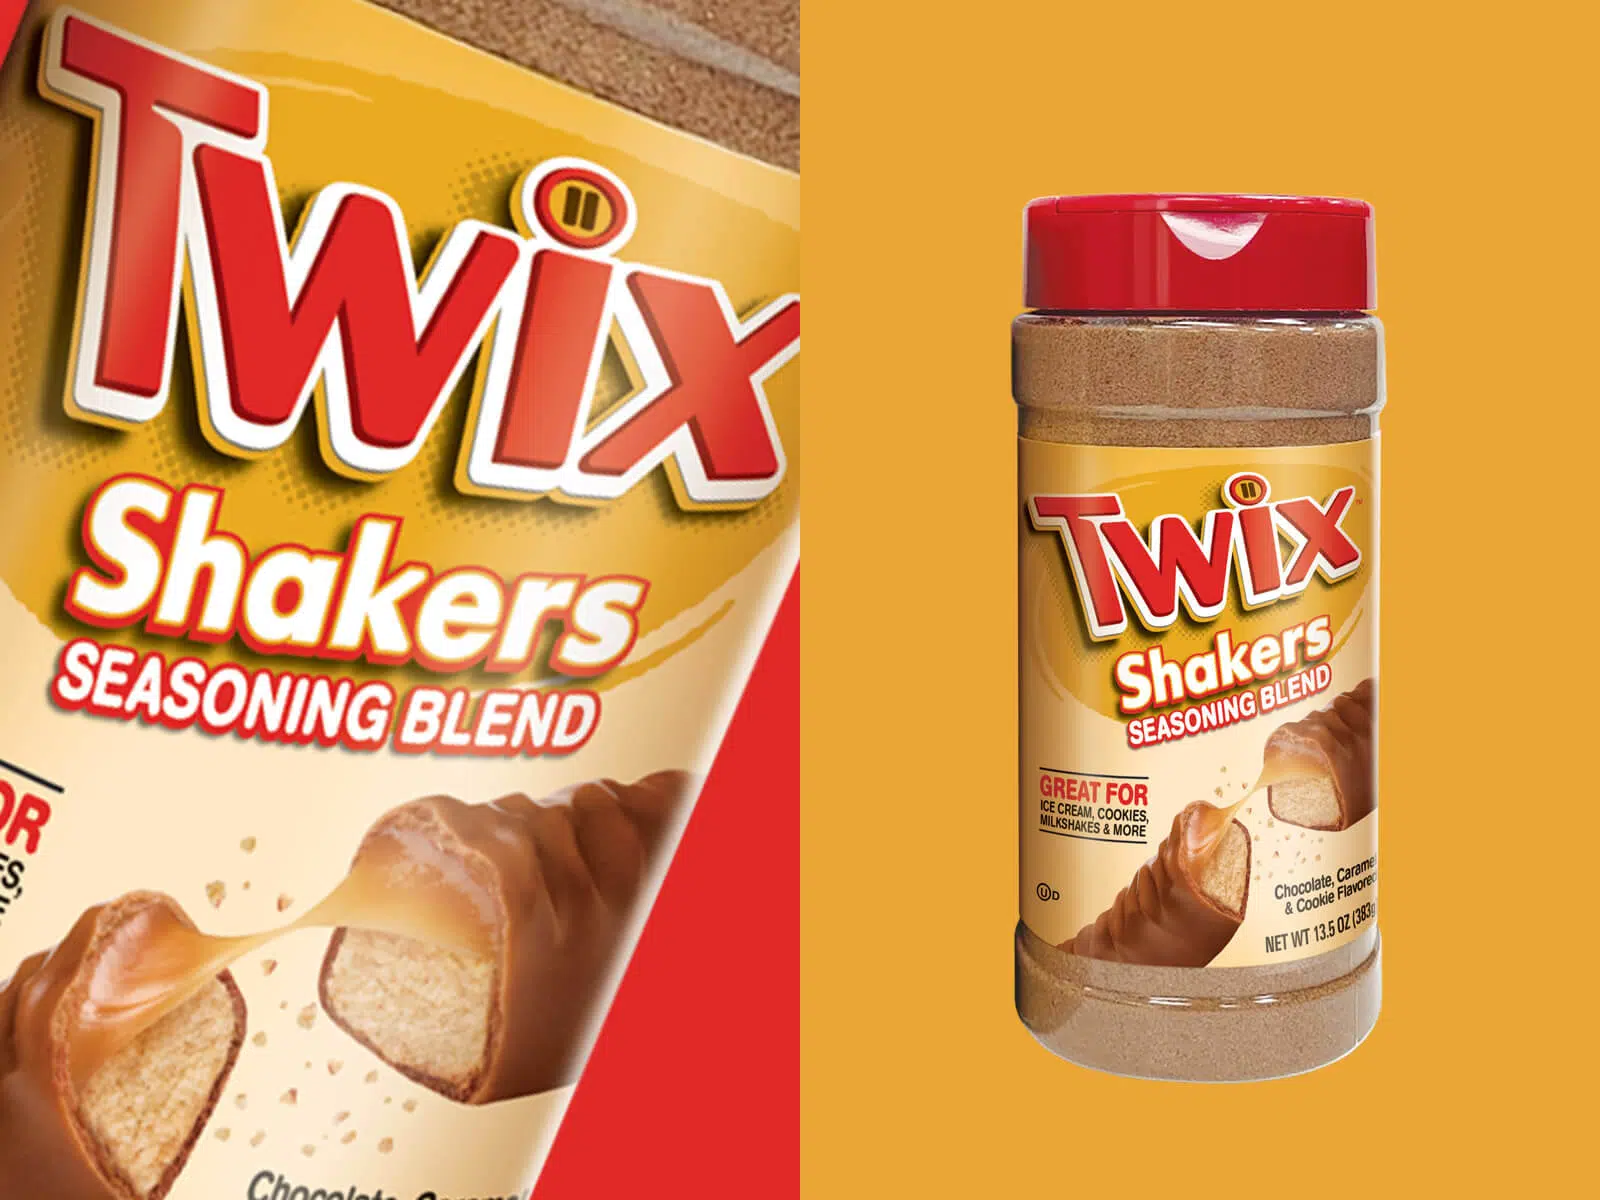 Twix Launches Seasoning to Sprinkle its Chocolate Bar Flavors on Anything